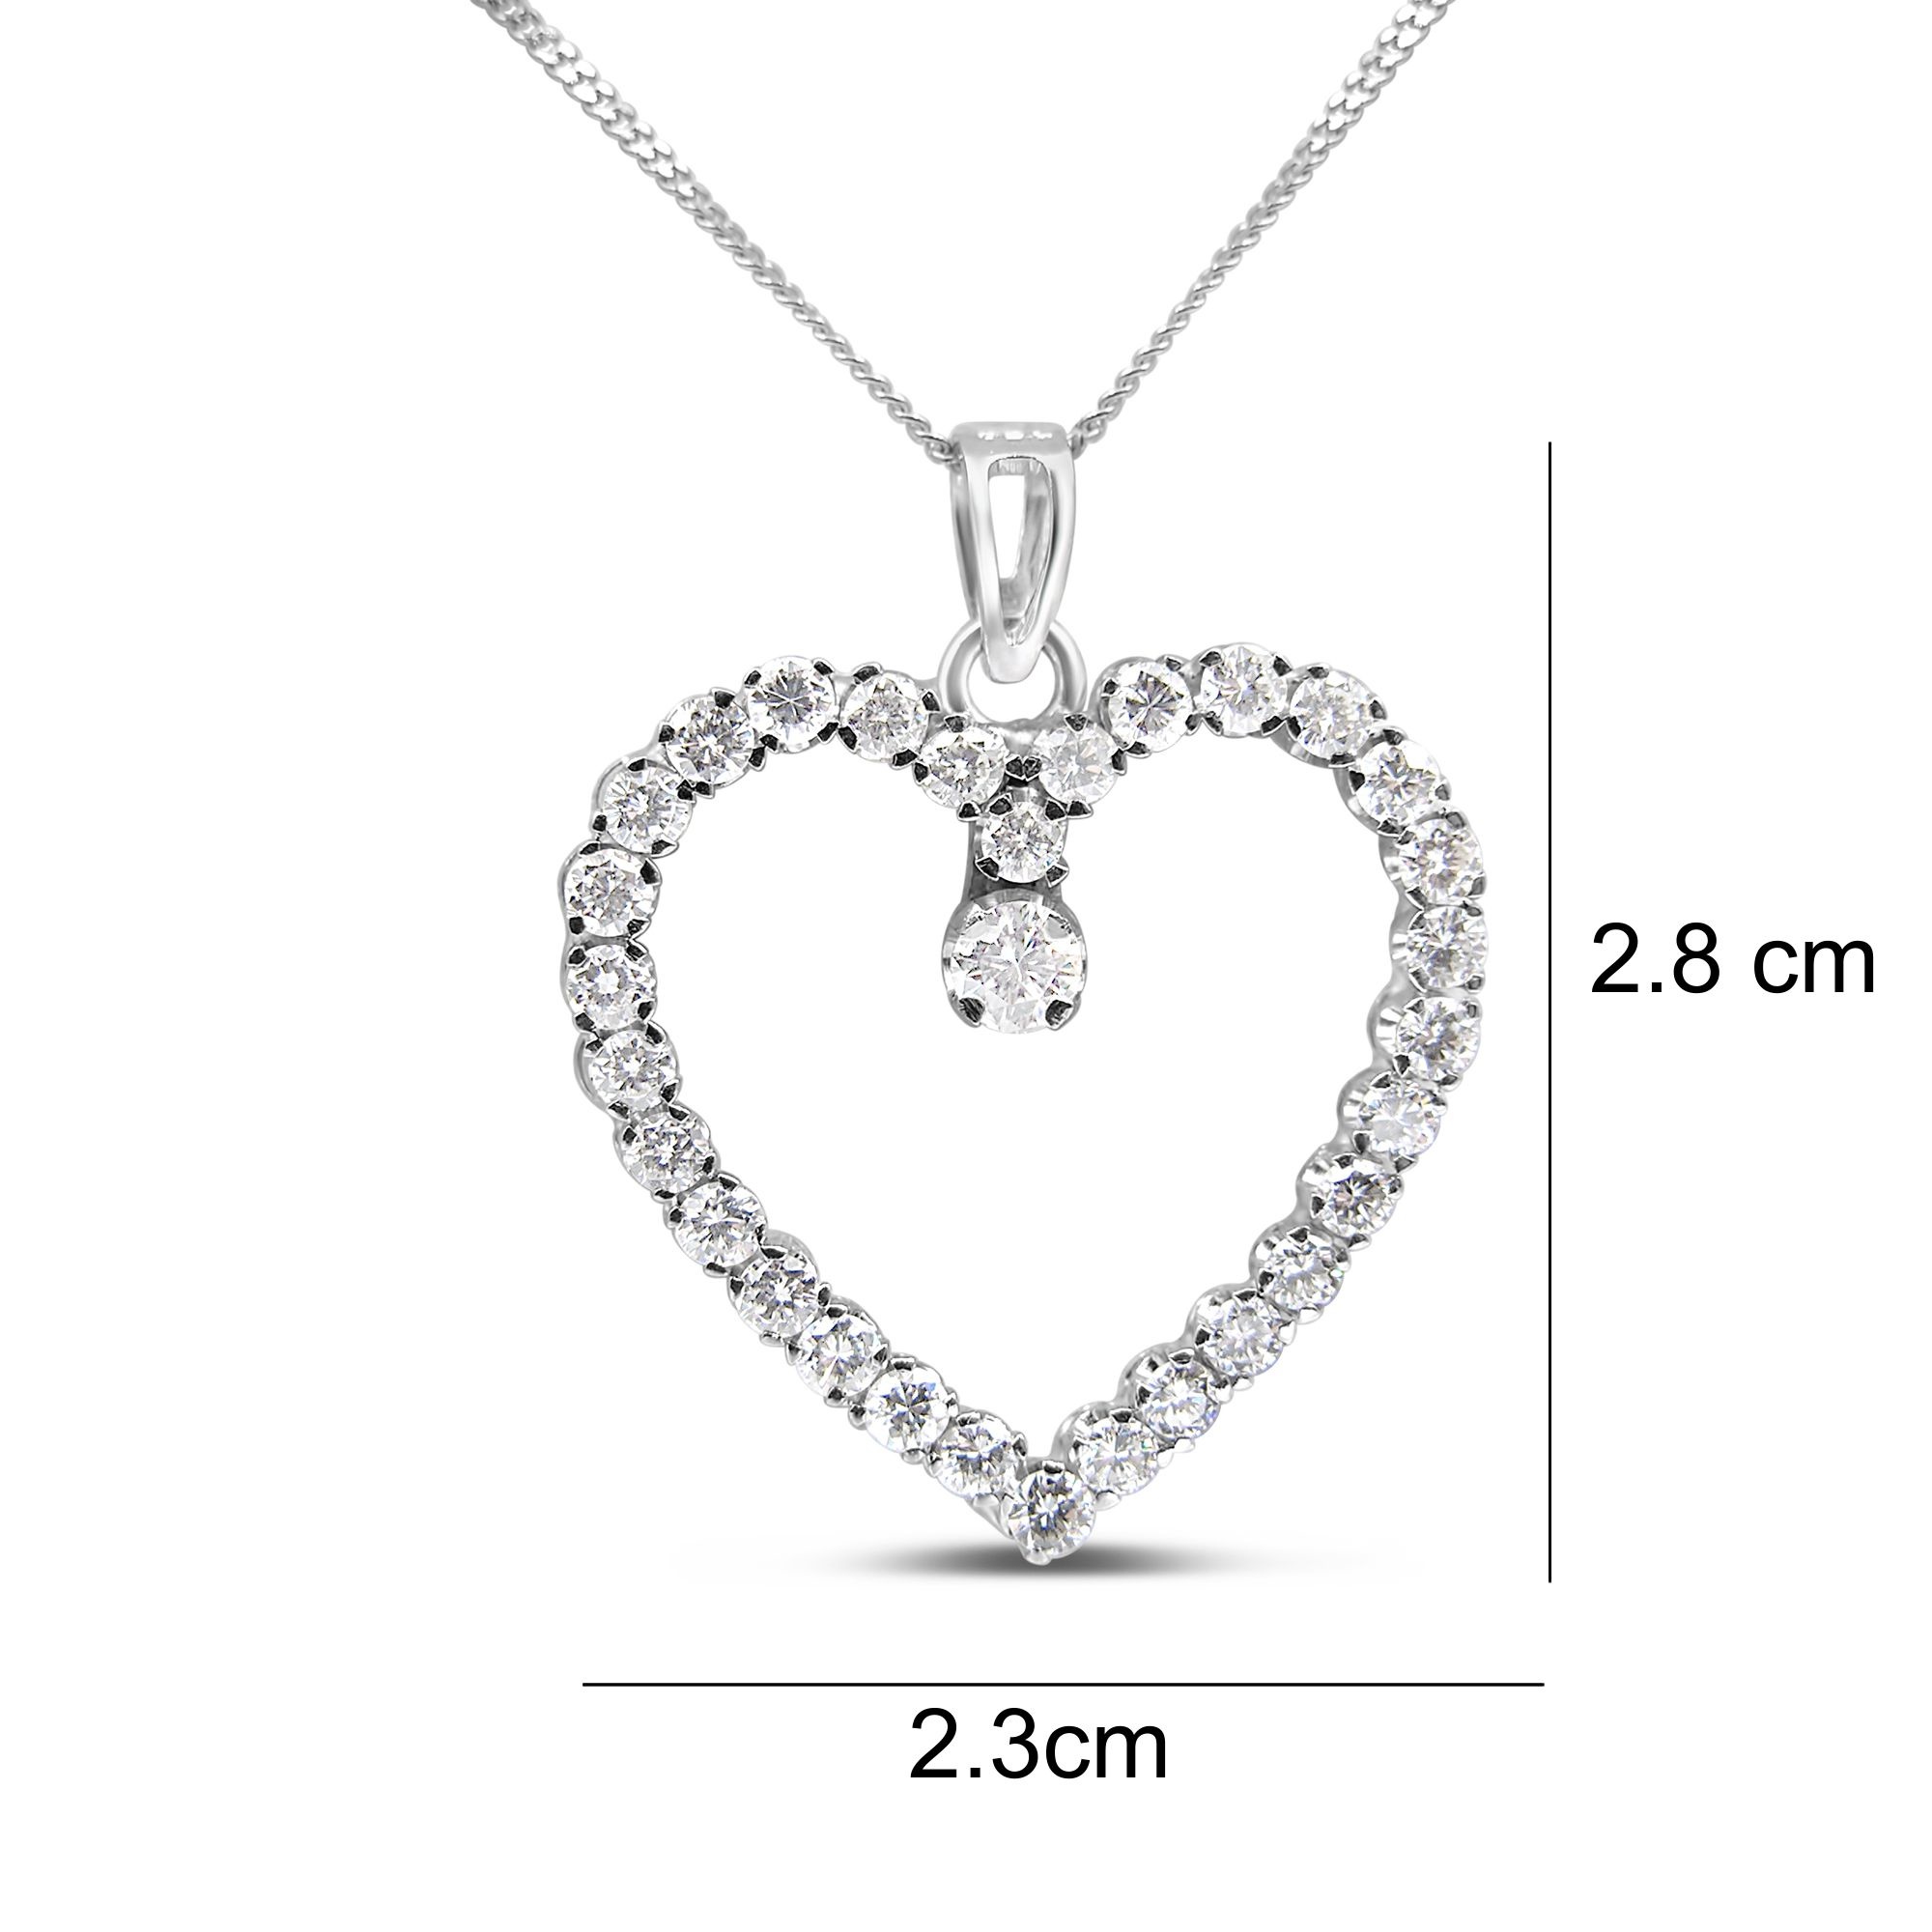 18kt white gold heart pendant with 2.12 ct diamonds